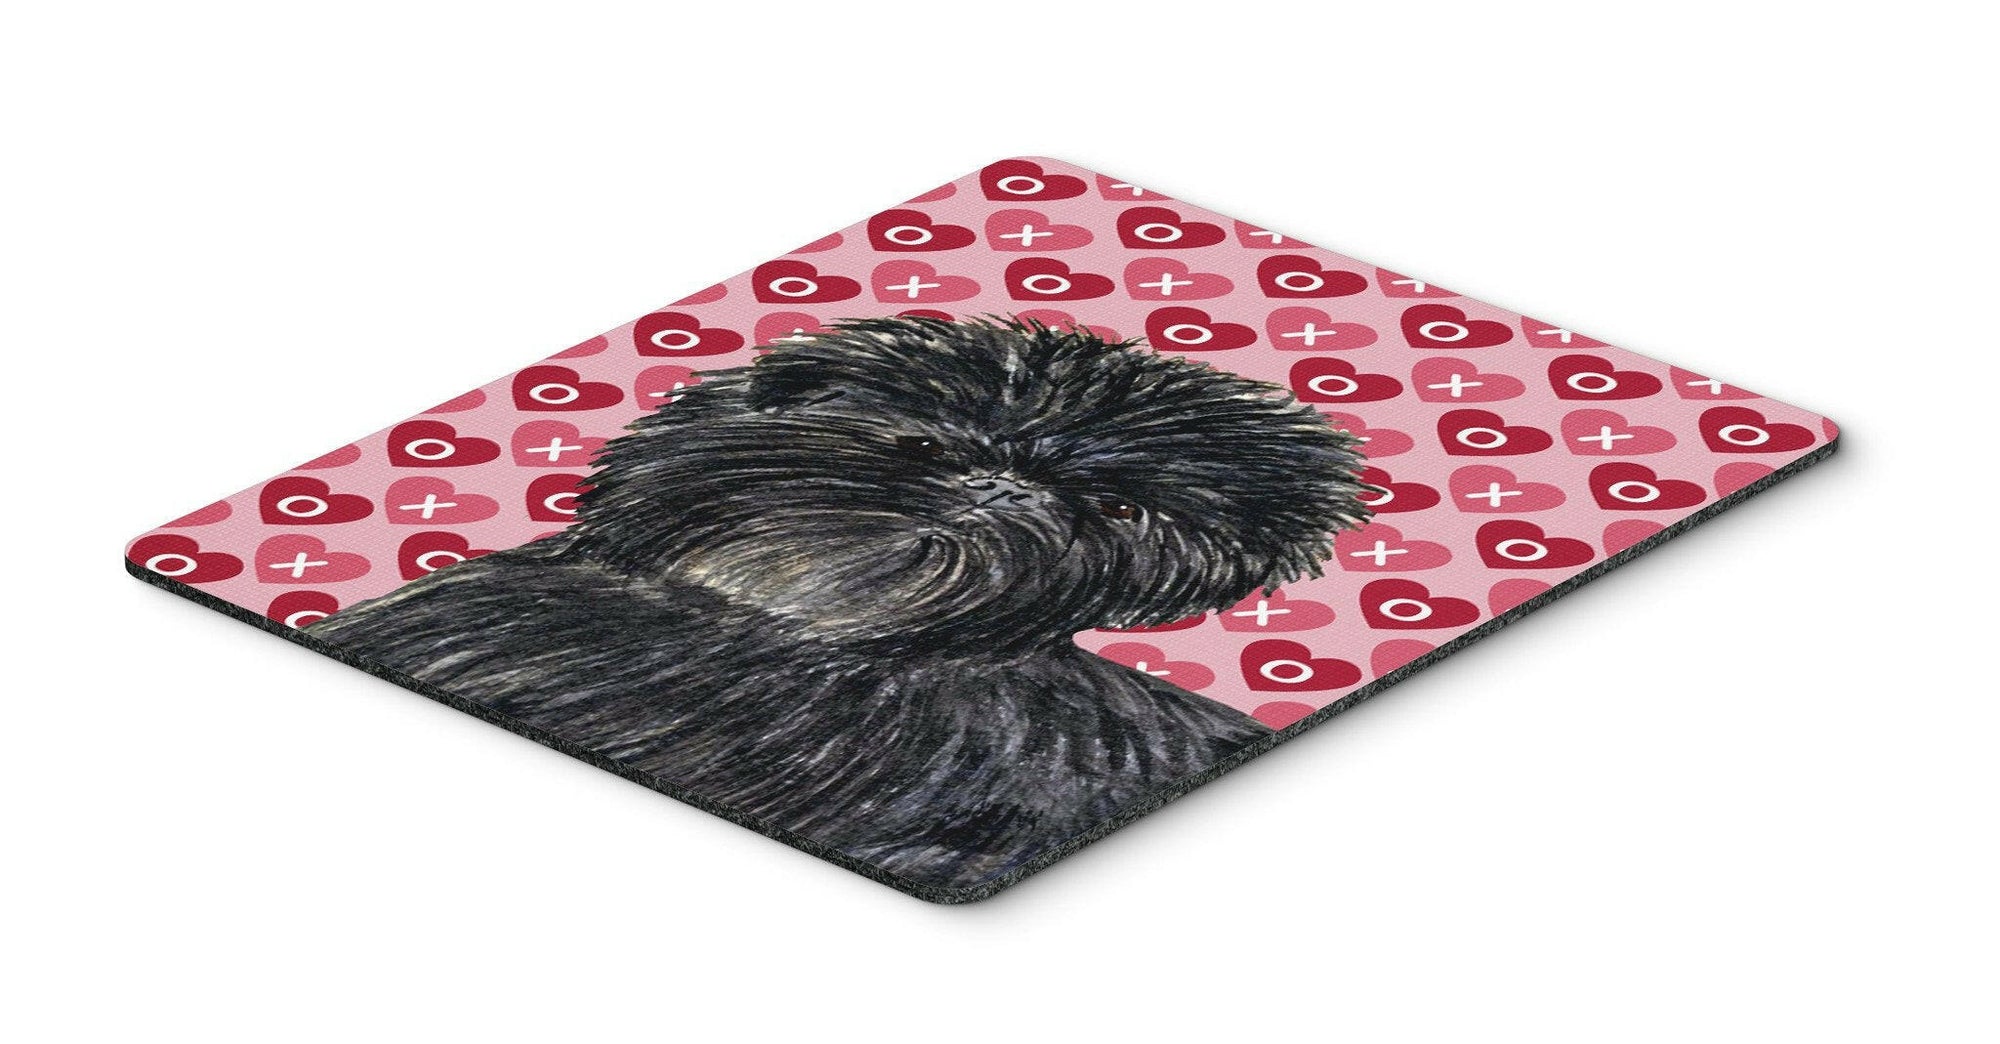 Affenpinscher Hearts Love and Valentine's Day Mouse Pad, Hot Pad or Trivet by Caroline's Treasures